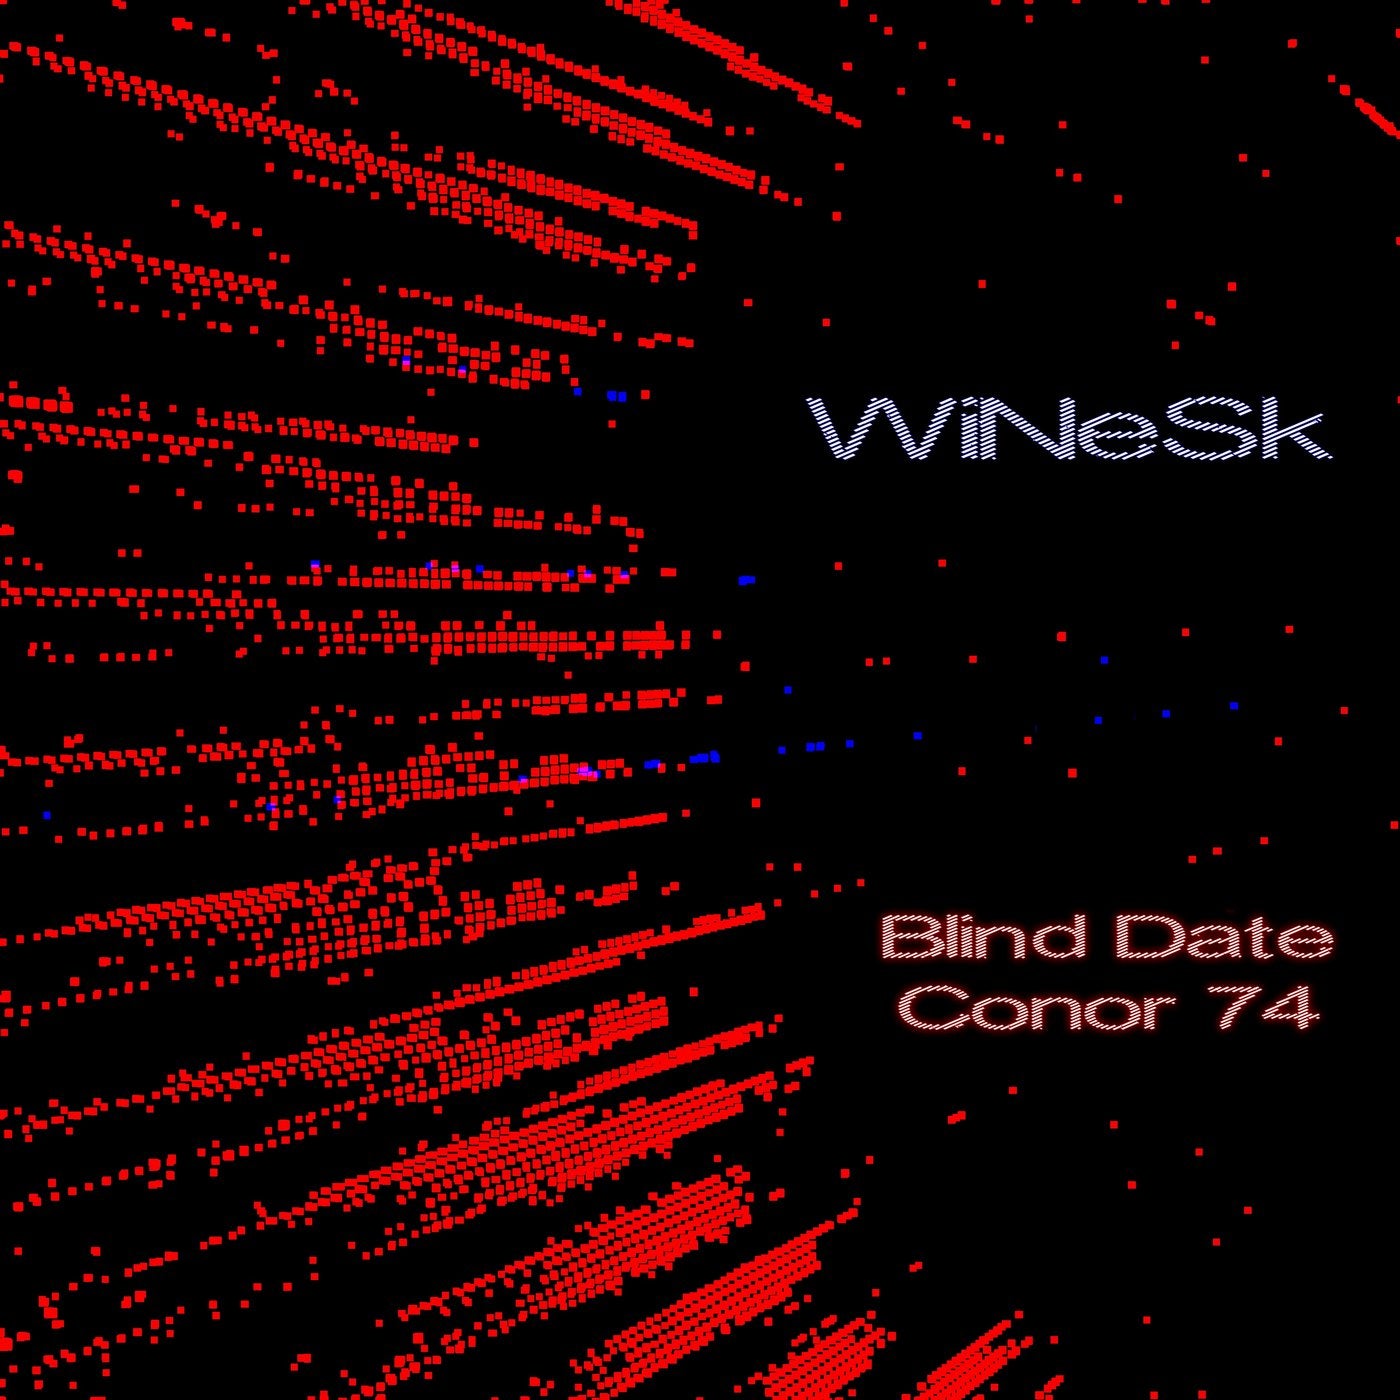 Blind Date, Conor 74